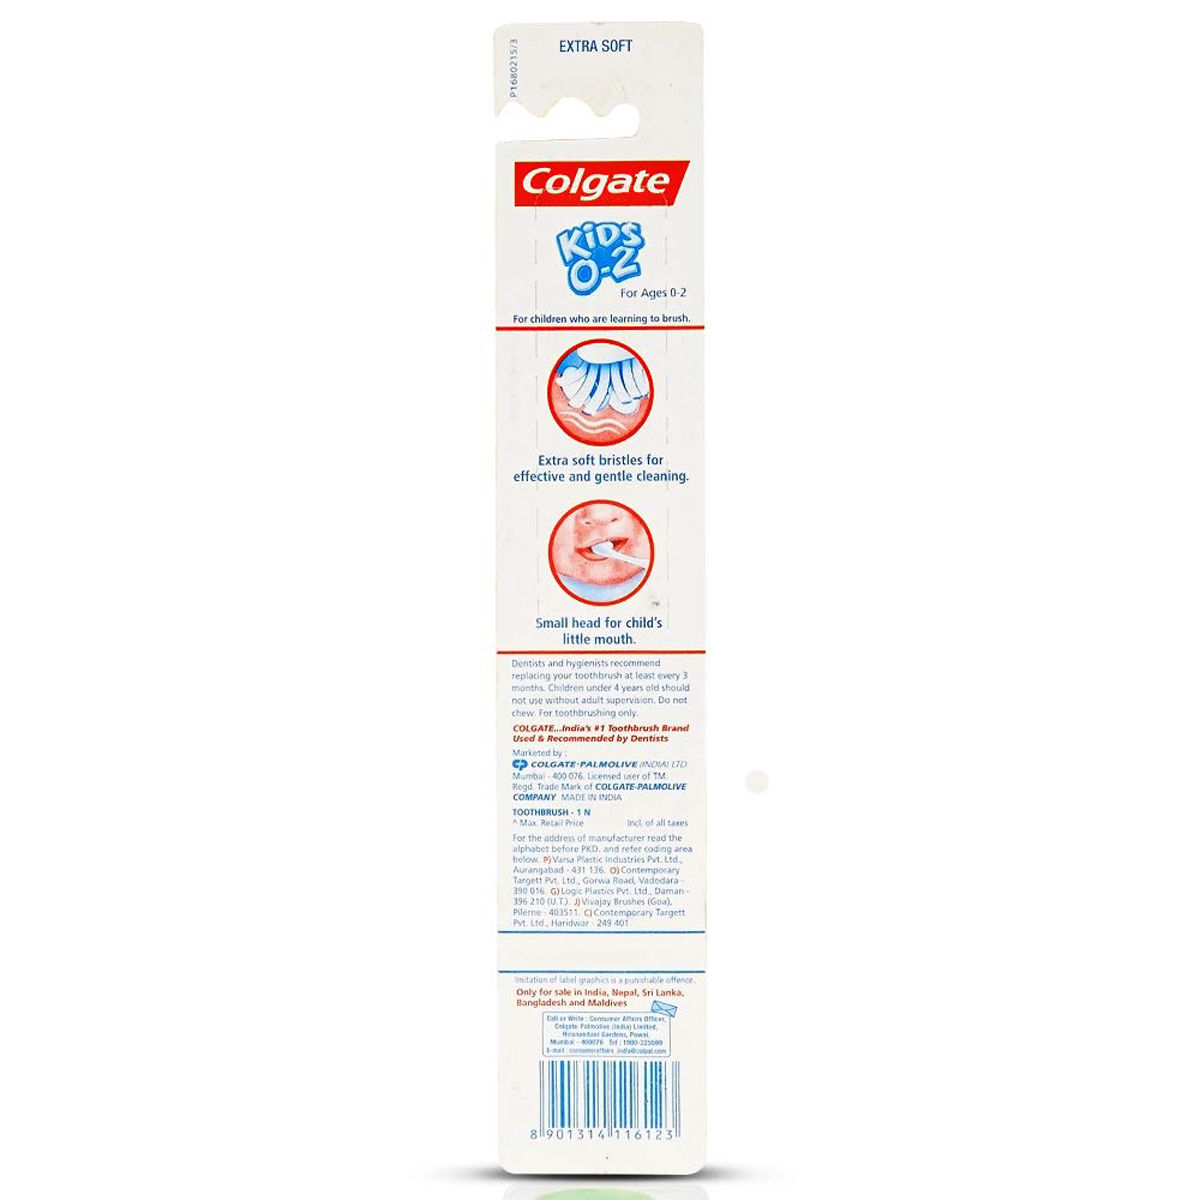 Colgate Kids Extra Soft Toothbrush 0 to 2 Years, 1 Count, Pack of 1 